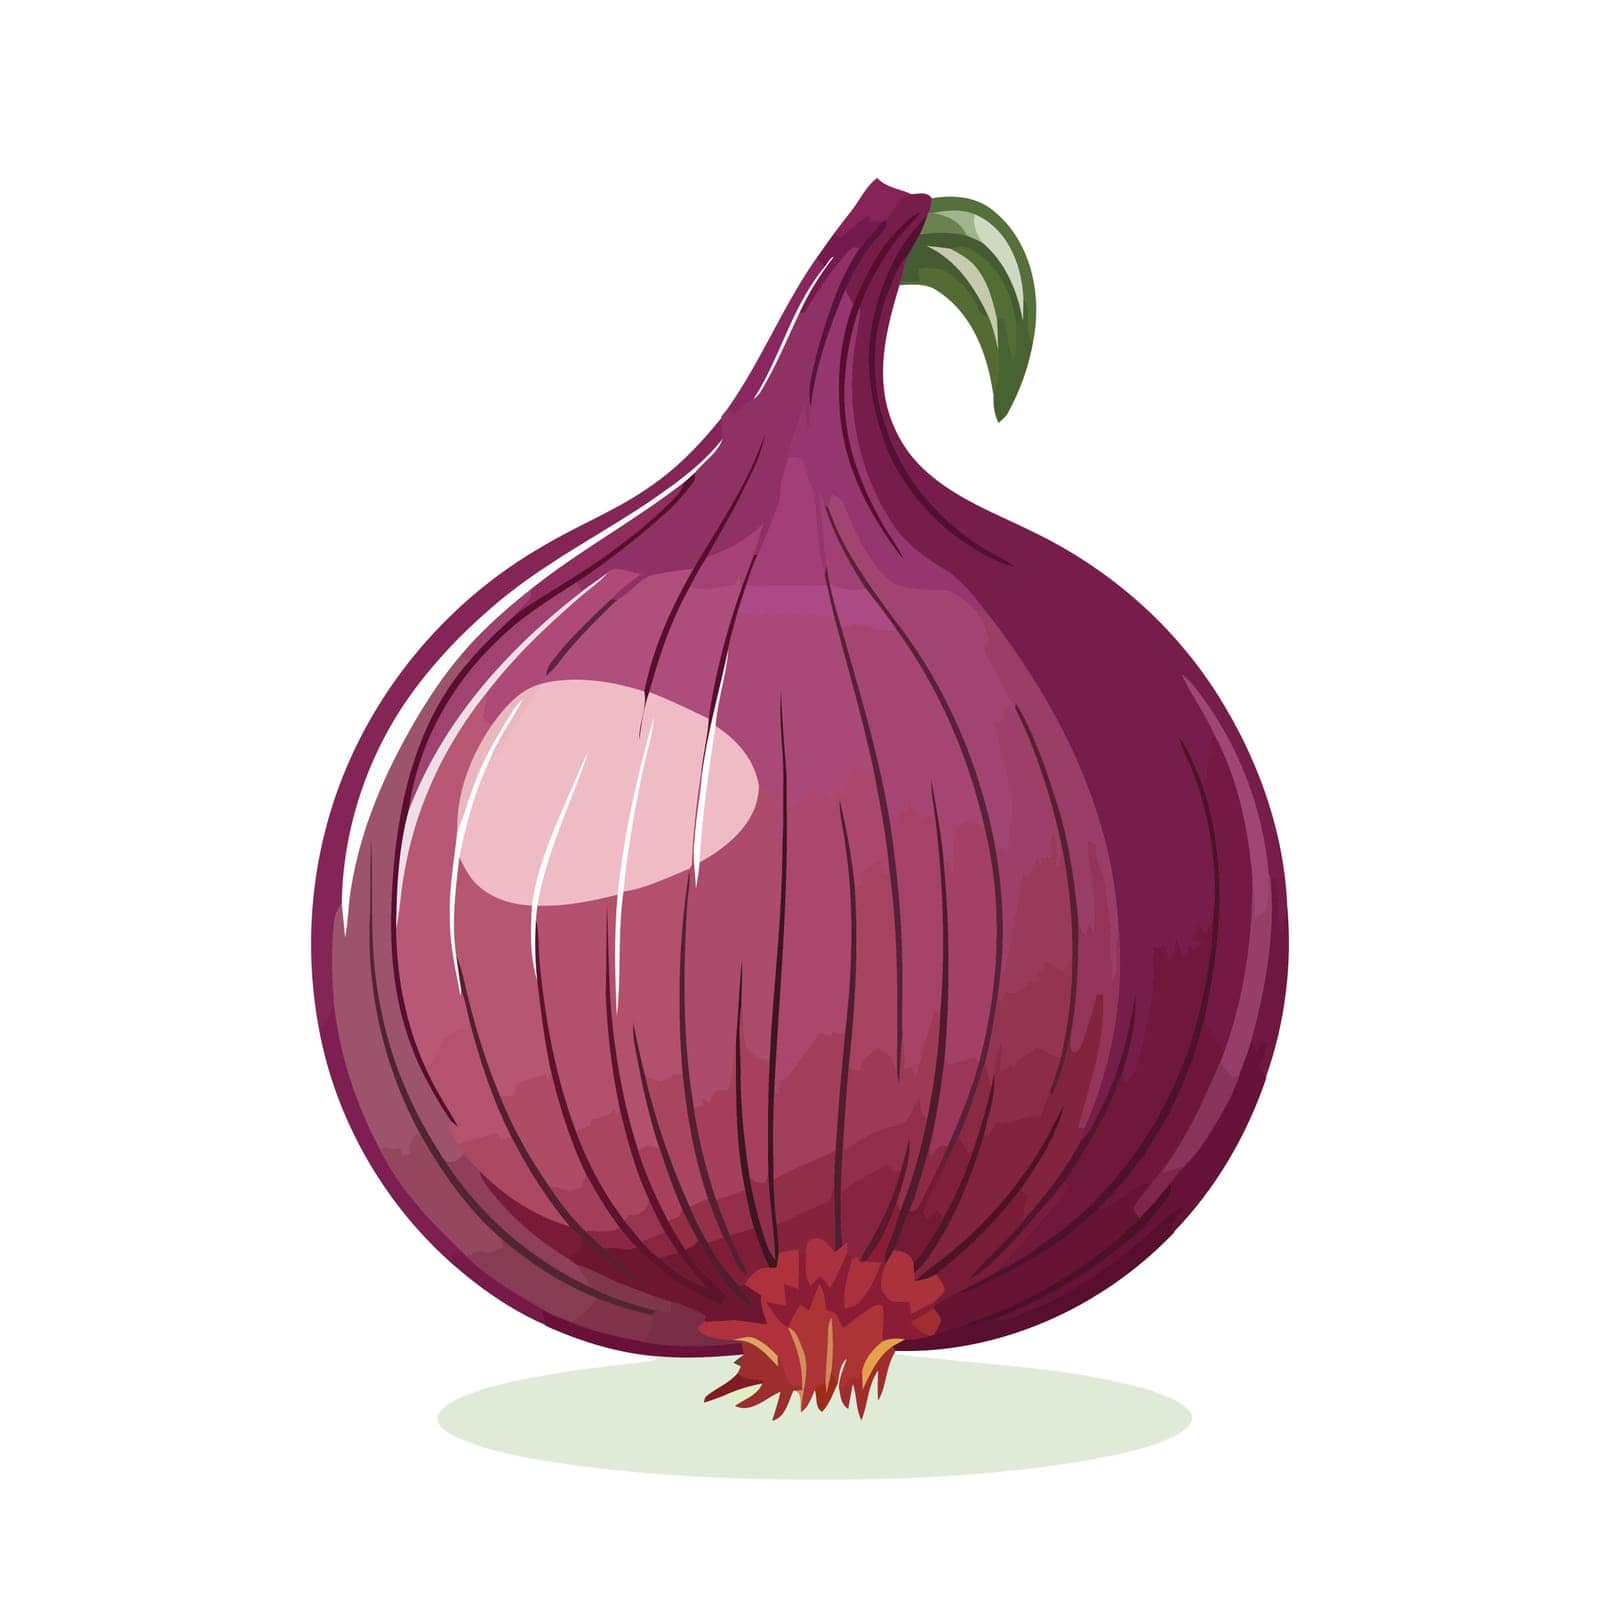 Onion icon. Onion image isolated. Onion sign in flat design. by Chekman